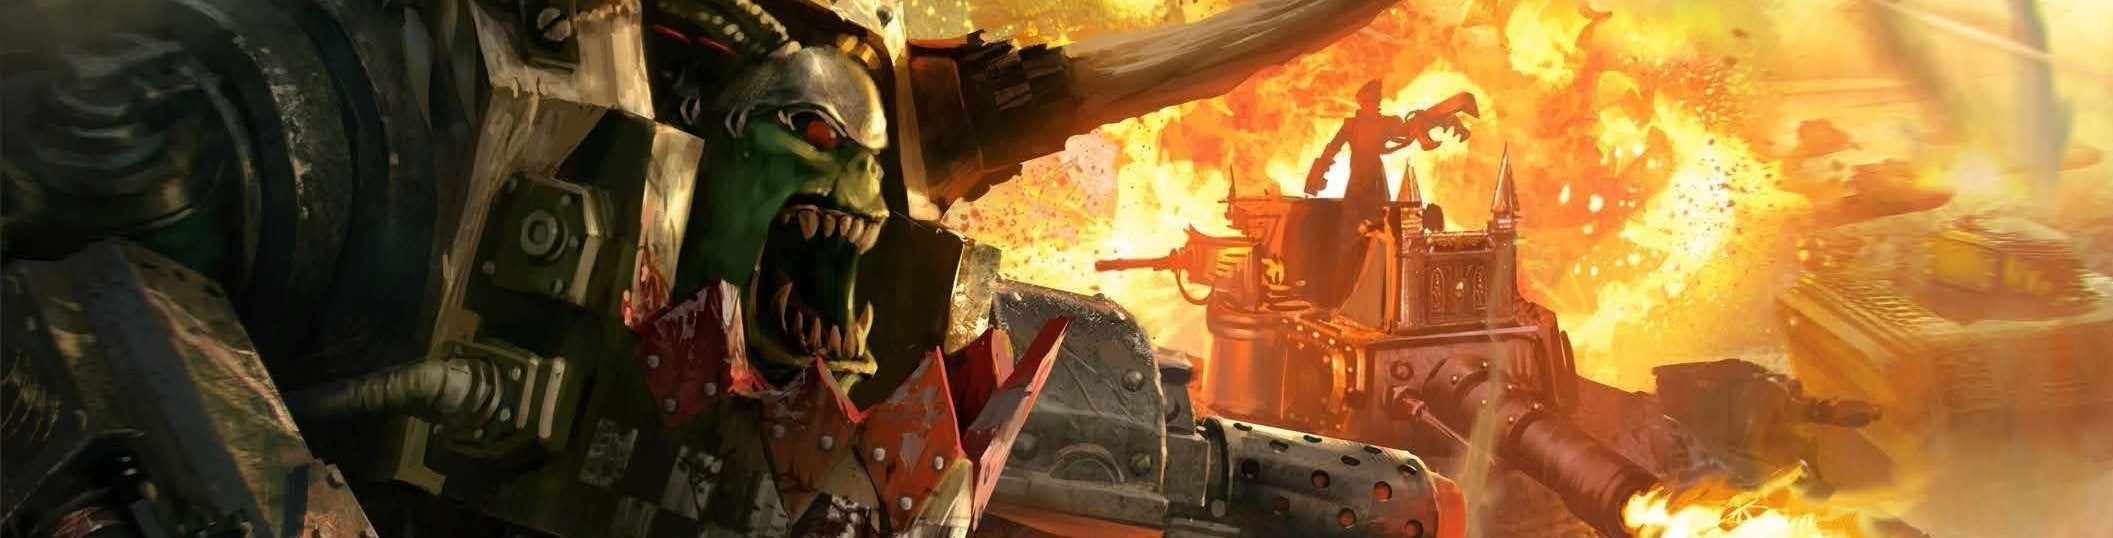 Image for Warhammer 40,000: Armageddon review